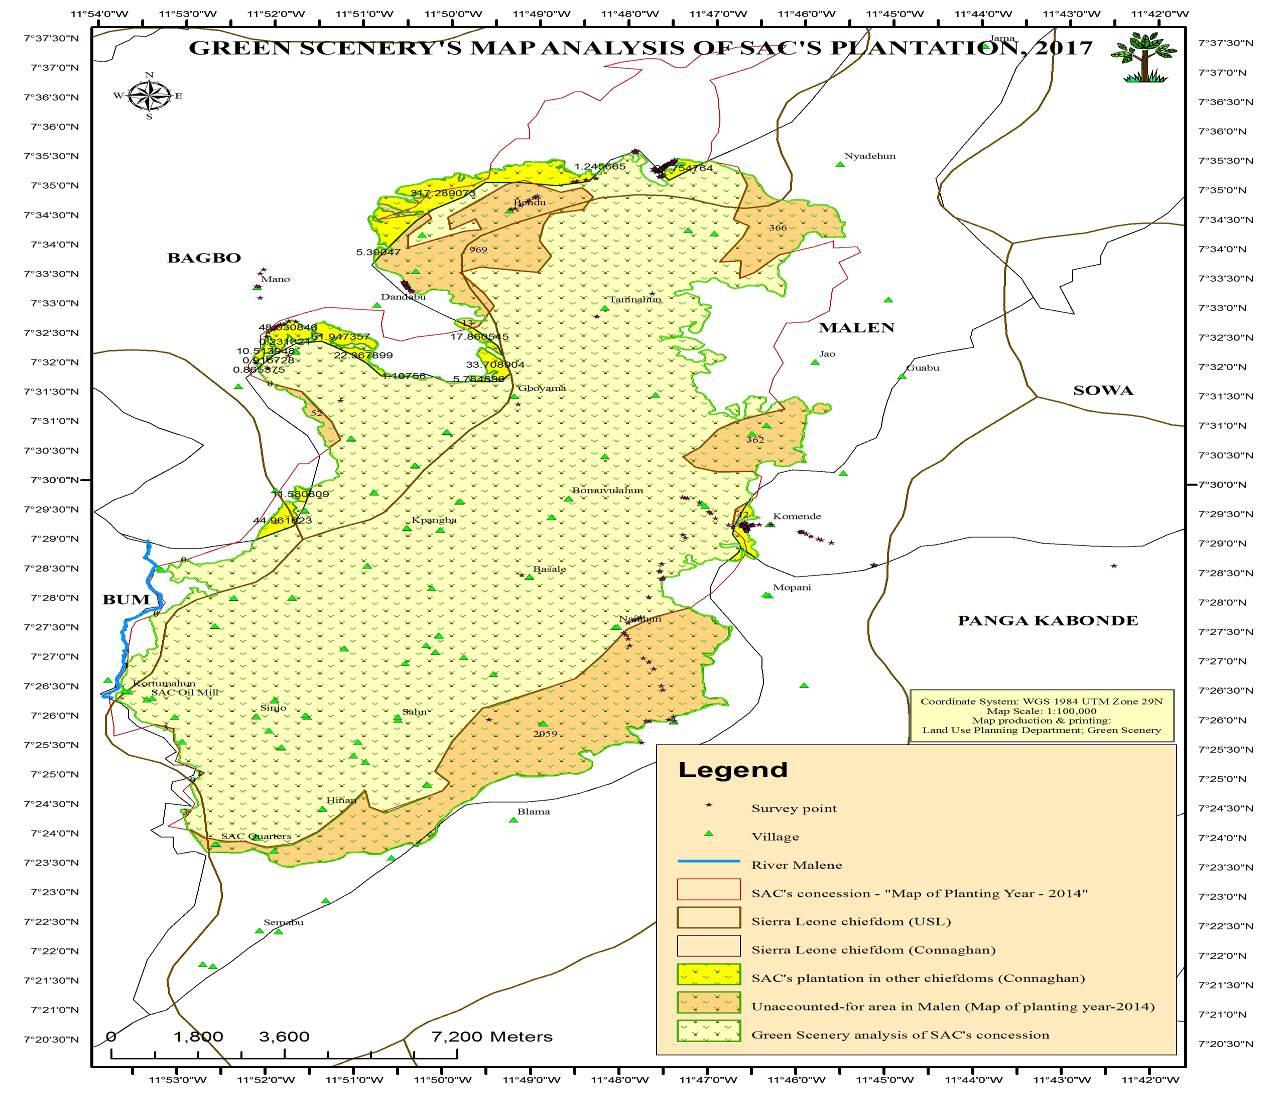 Spatial Monitoring Report on SOCFIN in Malen Chiefdom